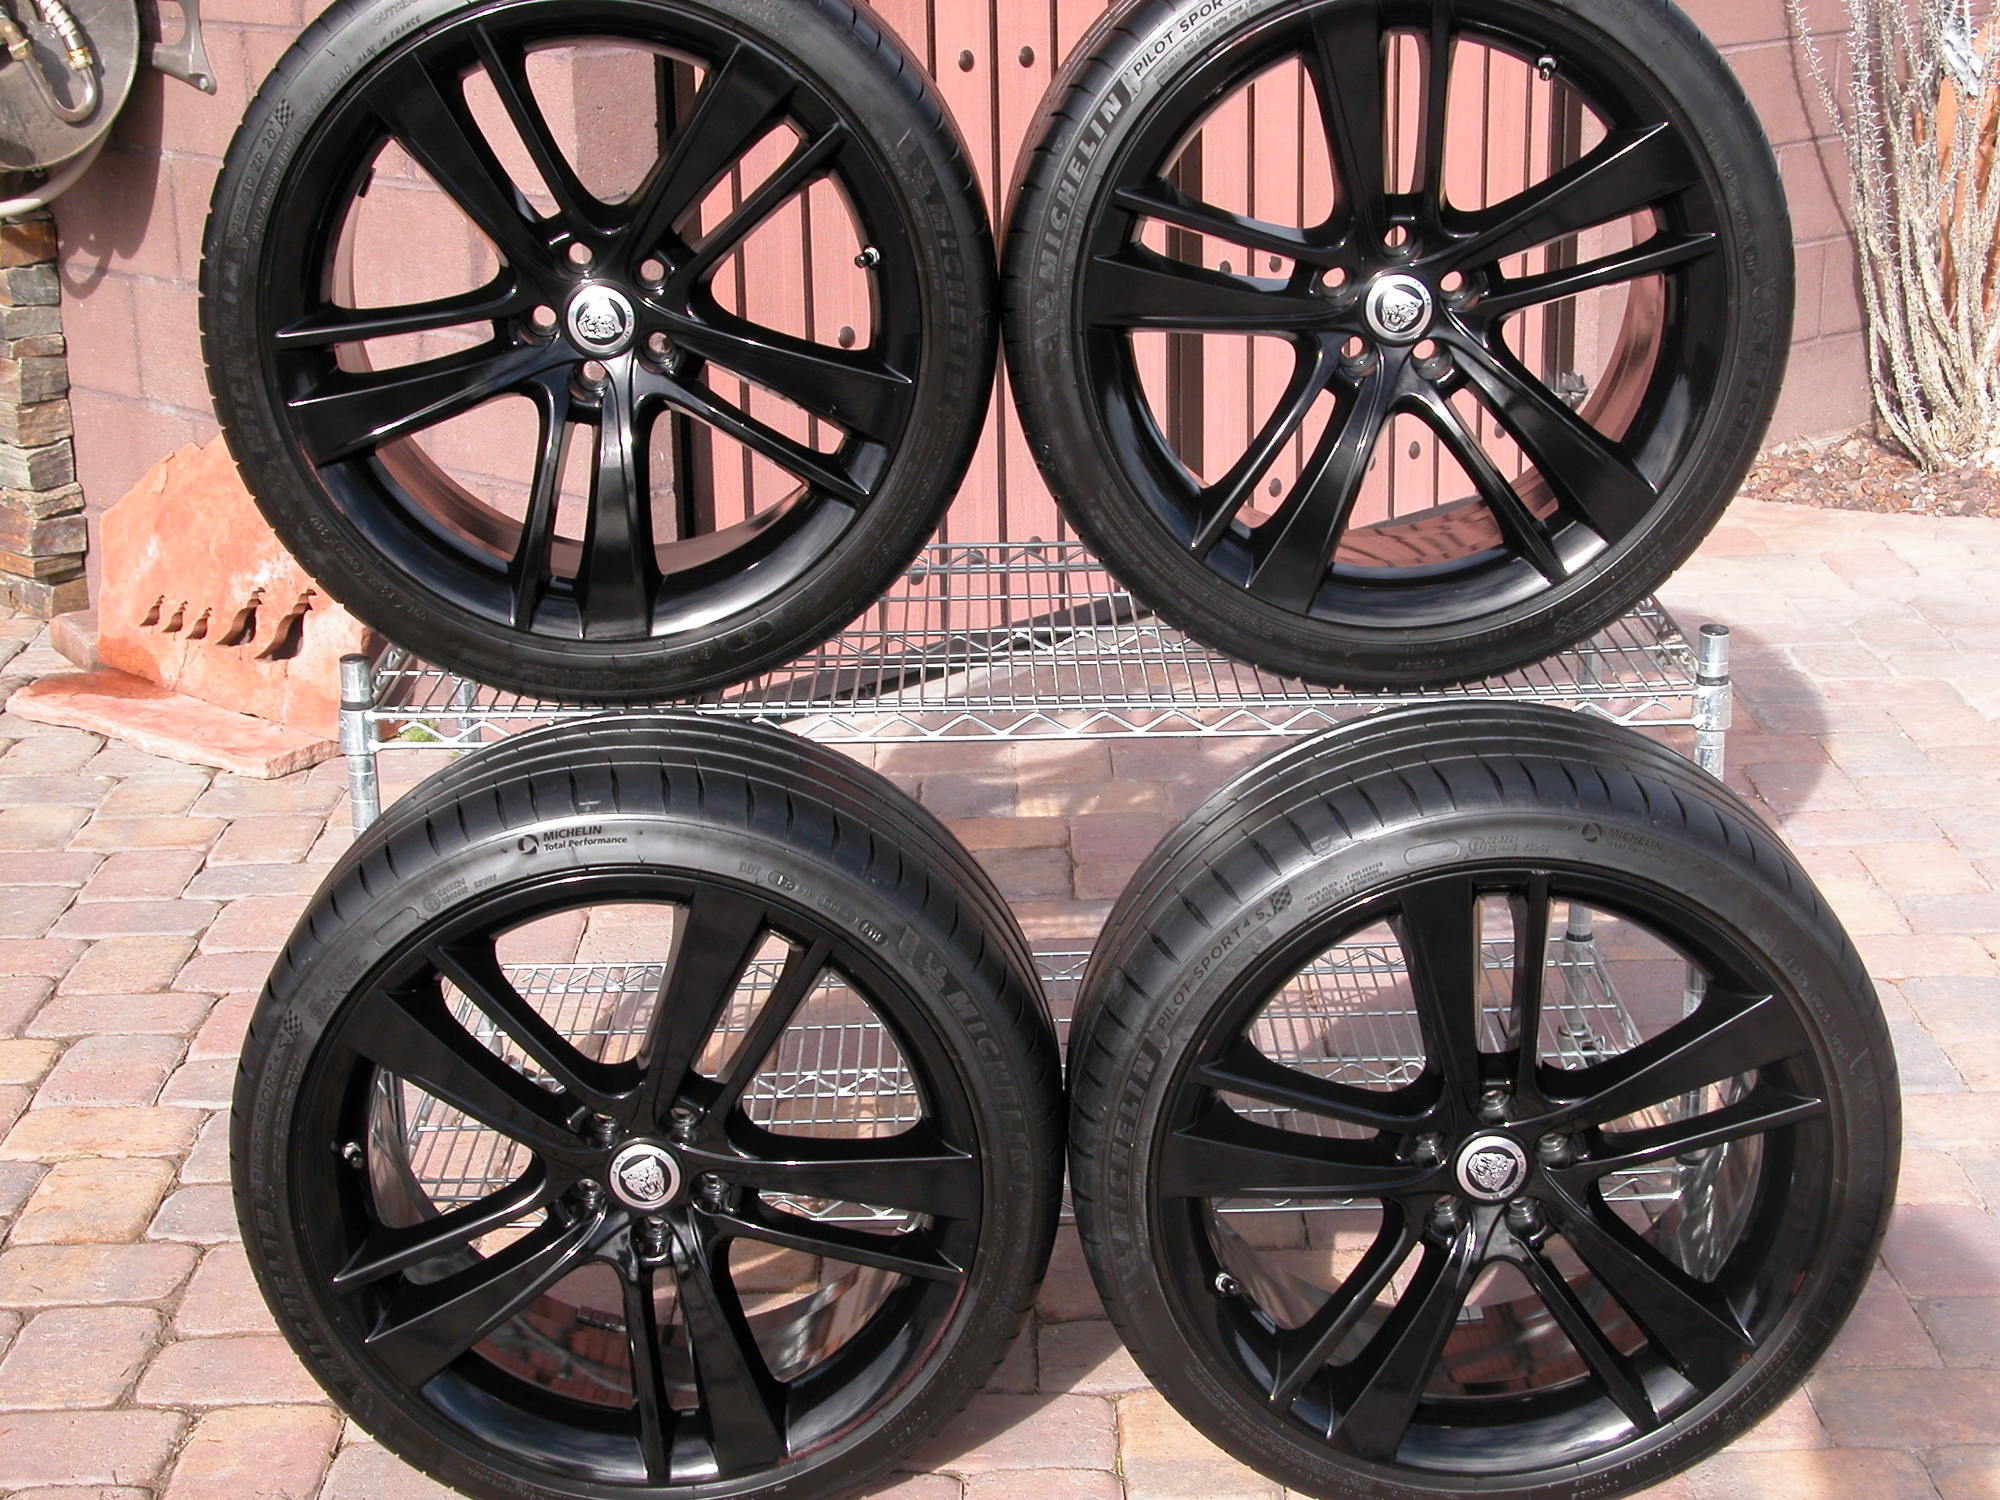 Wheels and Tires/Axles - Jaguar OEM Black "CYCLONE" Wheels and Michelin sport 4 S  tires 20" staggered Wheels - Used - All Years Jaguar F-Type - Desert Hills, AZ 85086, United States